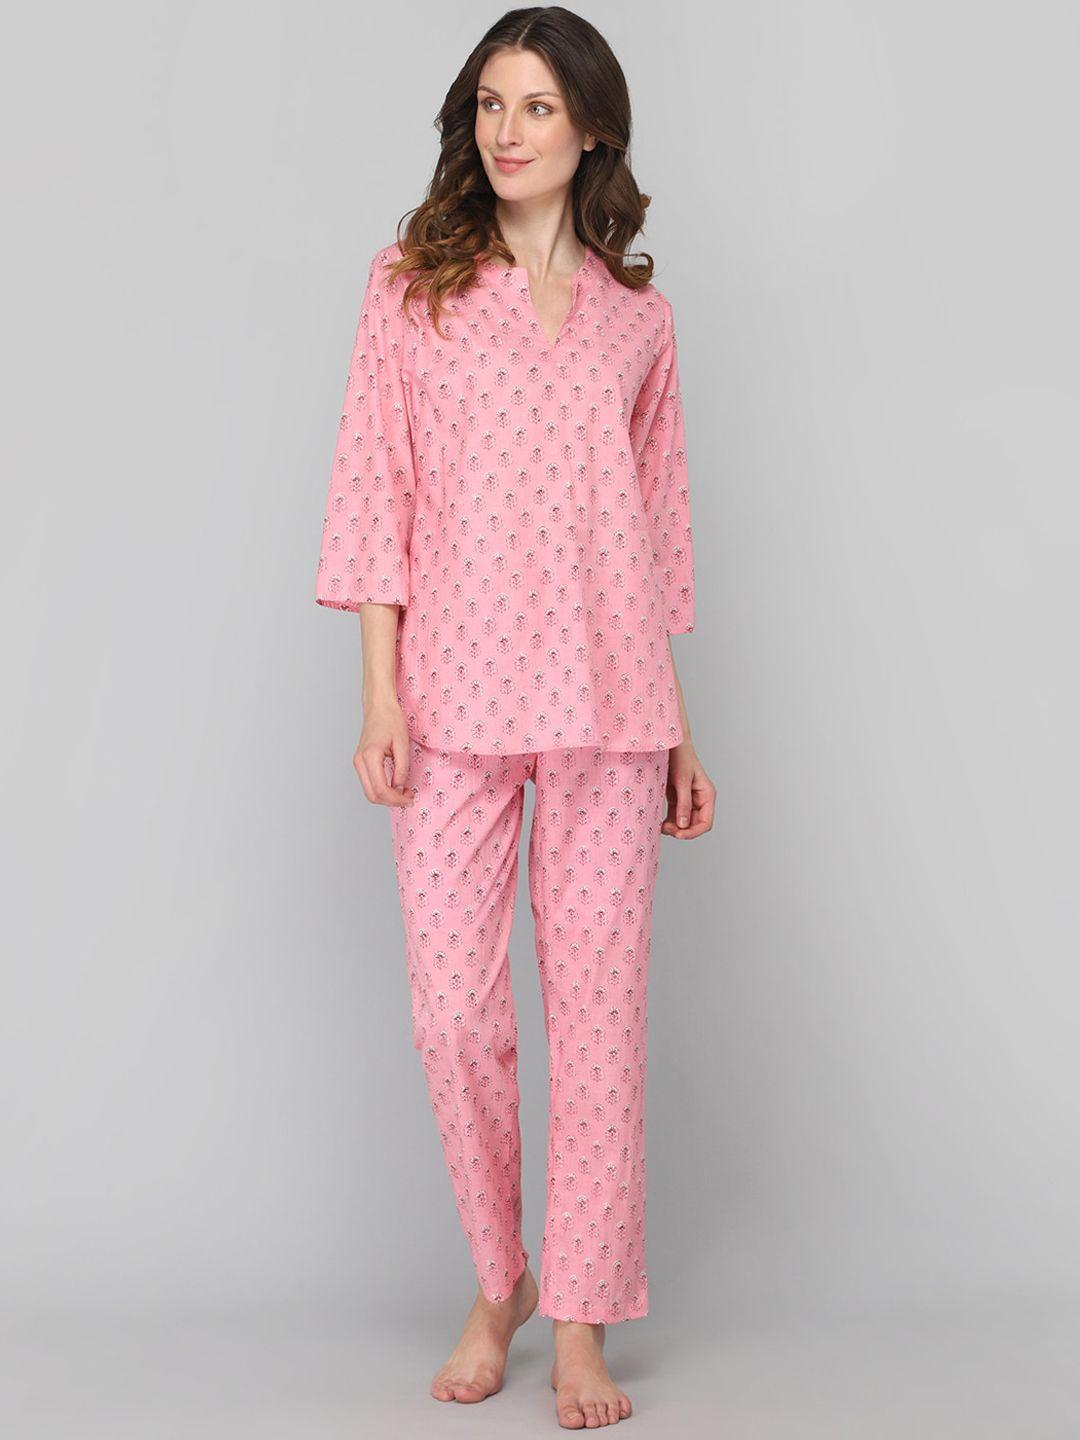 drape-in-vogue-women-pink-&-white-floral-printed-night-suit